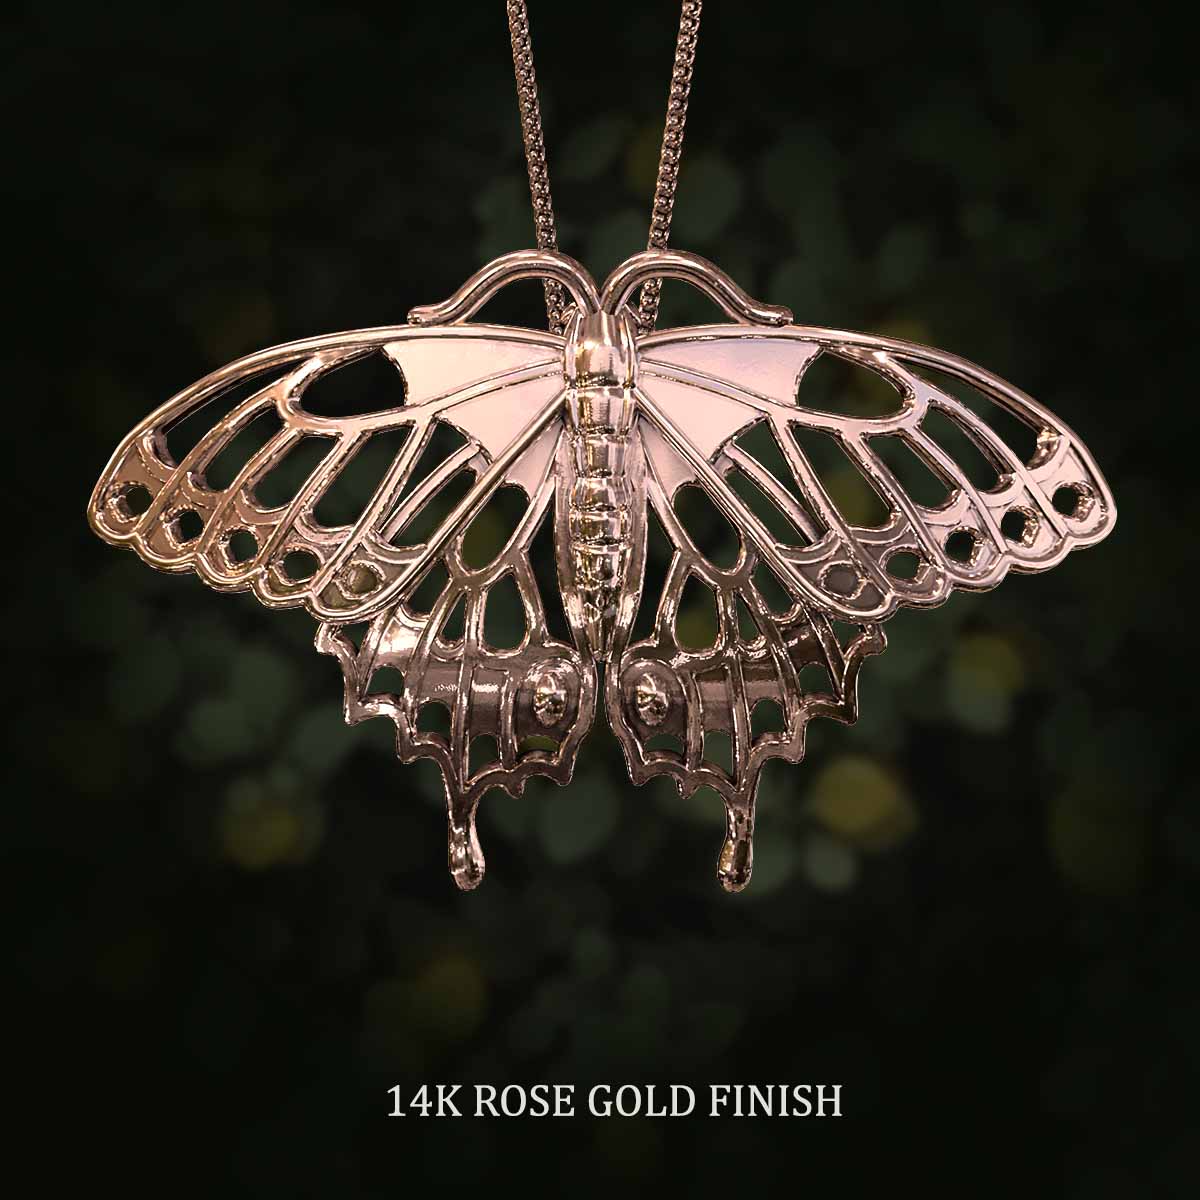     14k-Rose-Gold-Finish-Swallowtail-Butterfly-Pendant-Jewelry-For-Necklace